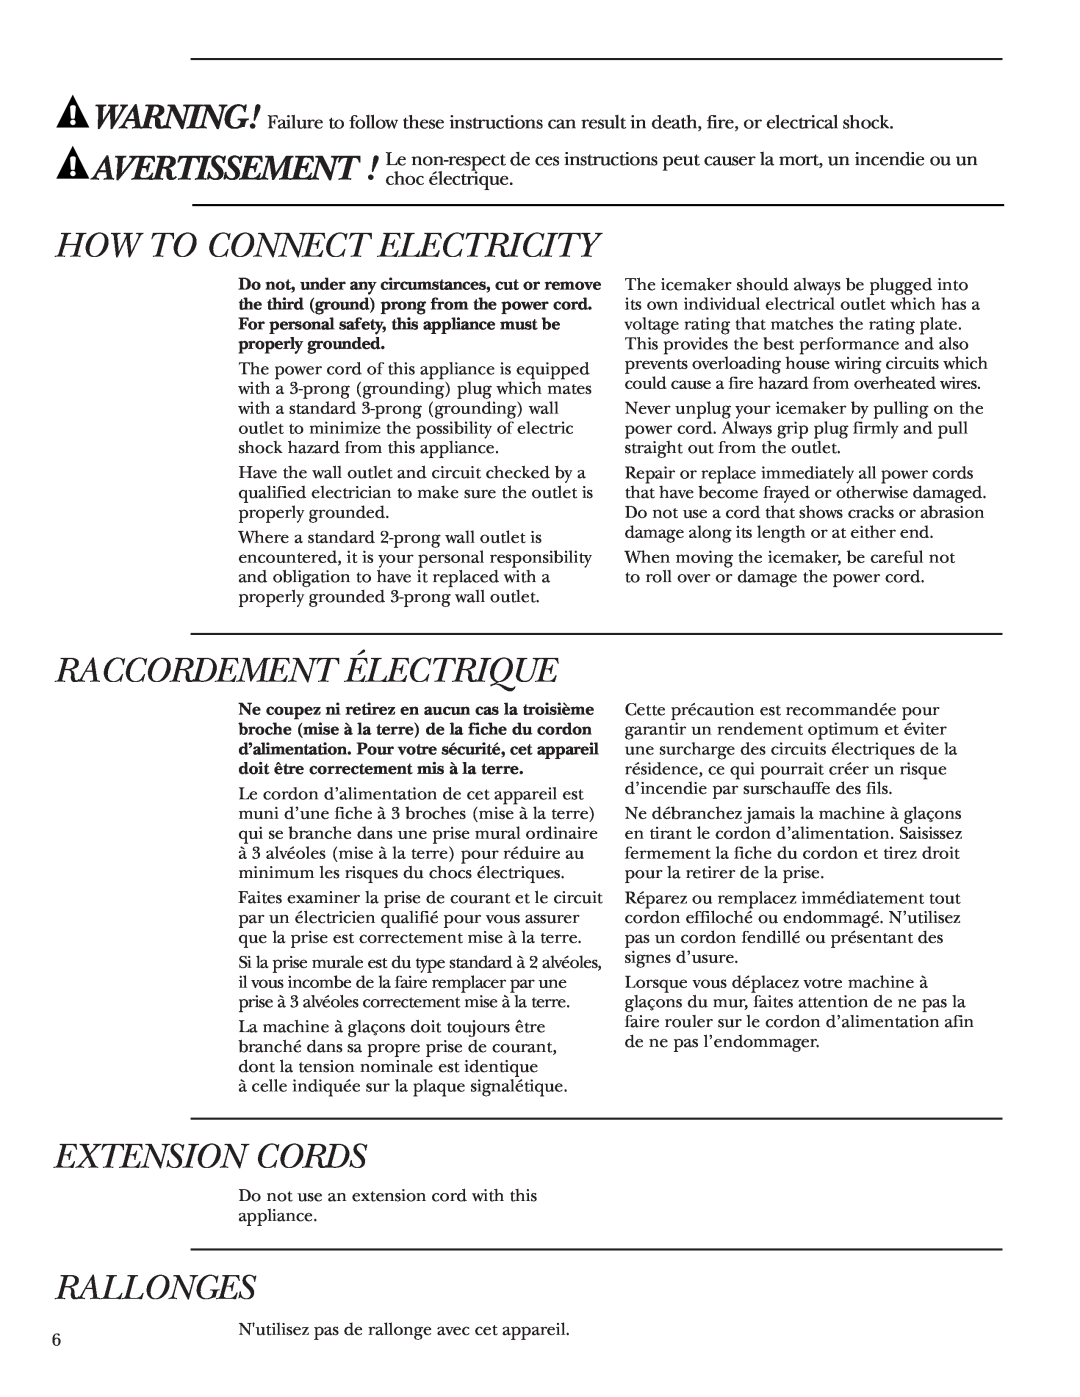 GE Monogram ZDIS15, ZDI15 owner manual How To Connect Electricity, Raccordement Électrique, Extension Cords, Rallonges 